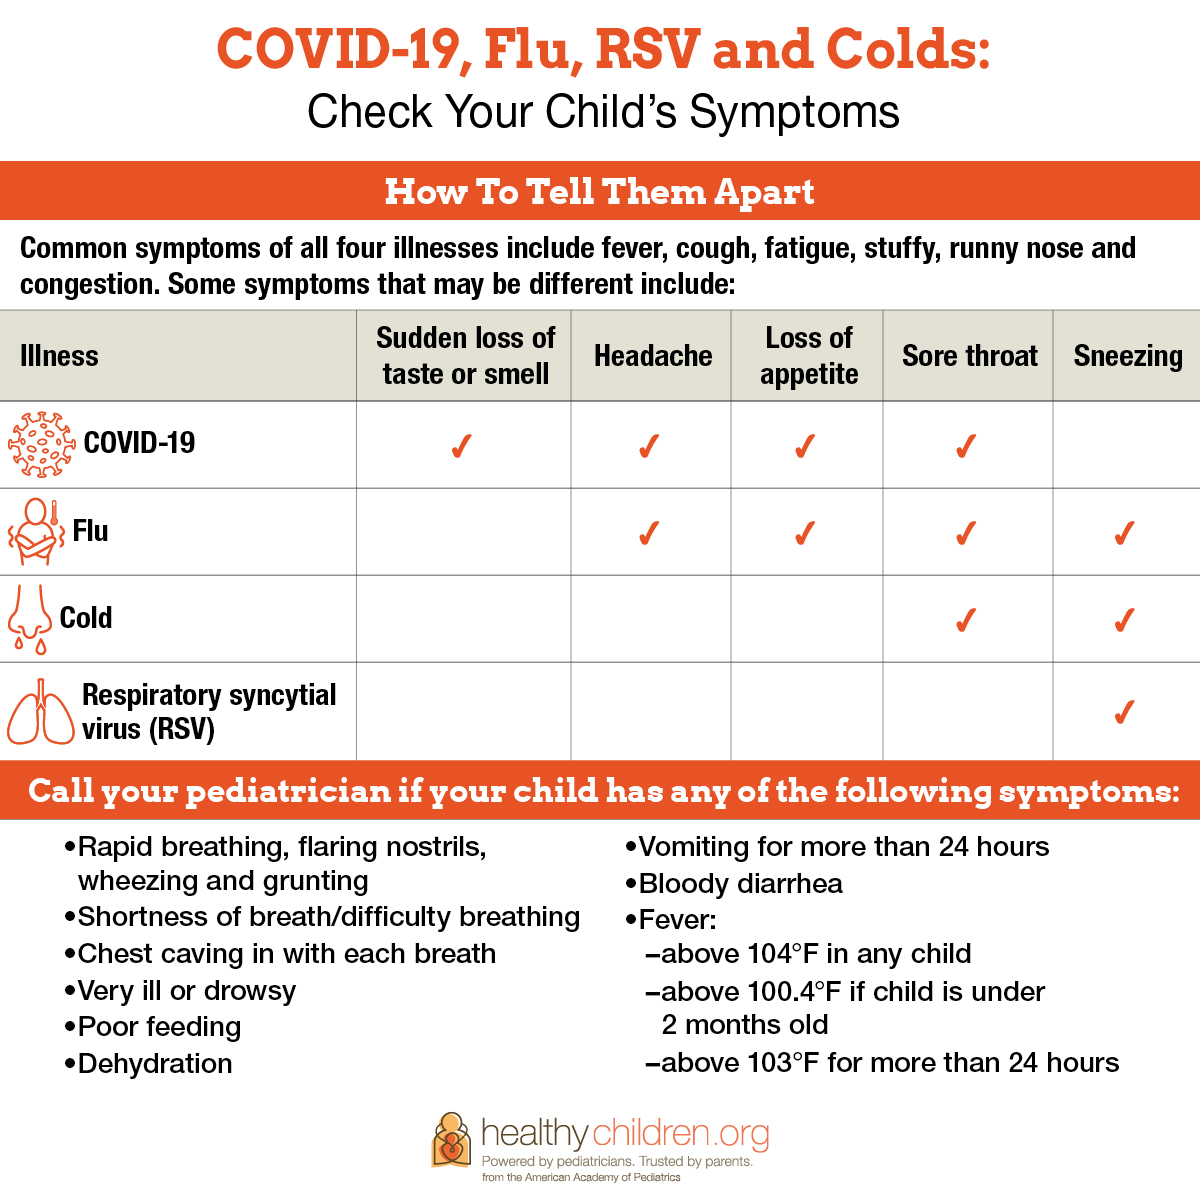 RSV, COVID, flu and cold symptoms can all be very similar. But there are some clues that set each of these common viruses apart. Learn more from AAP’s parenting website @HealthyChildren: ow.ly/s8nE50LlYqQ